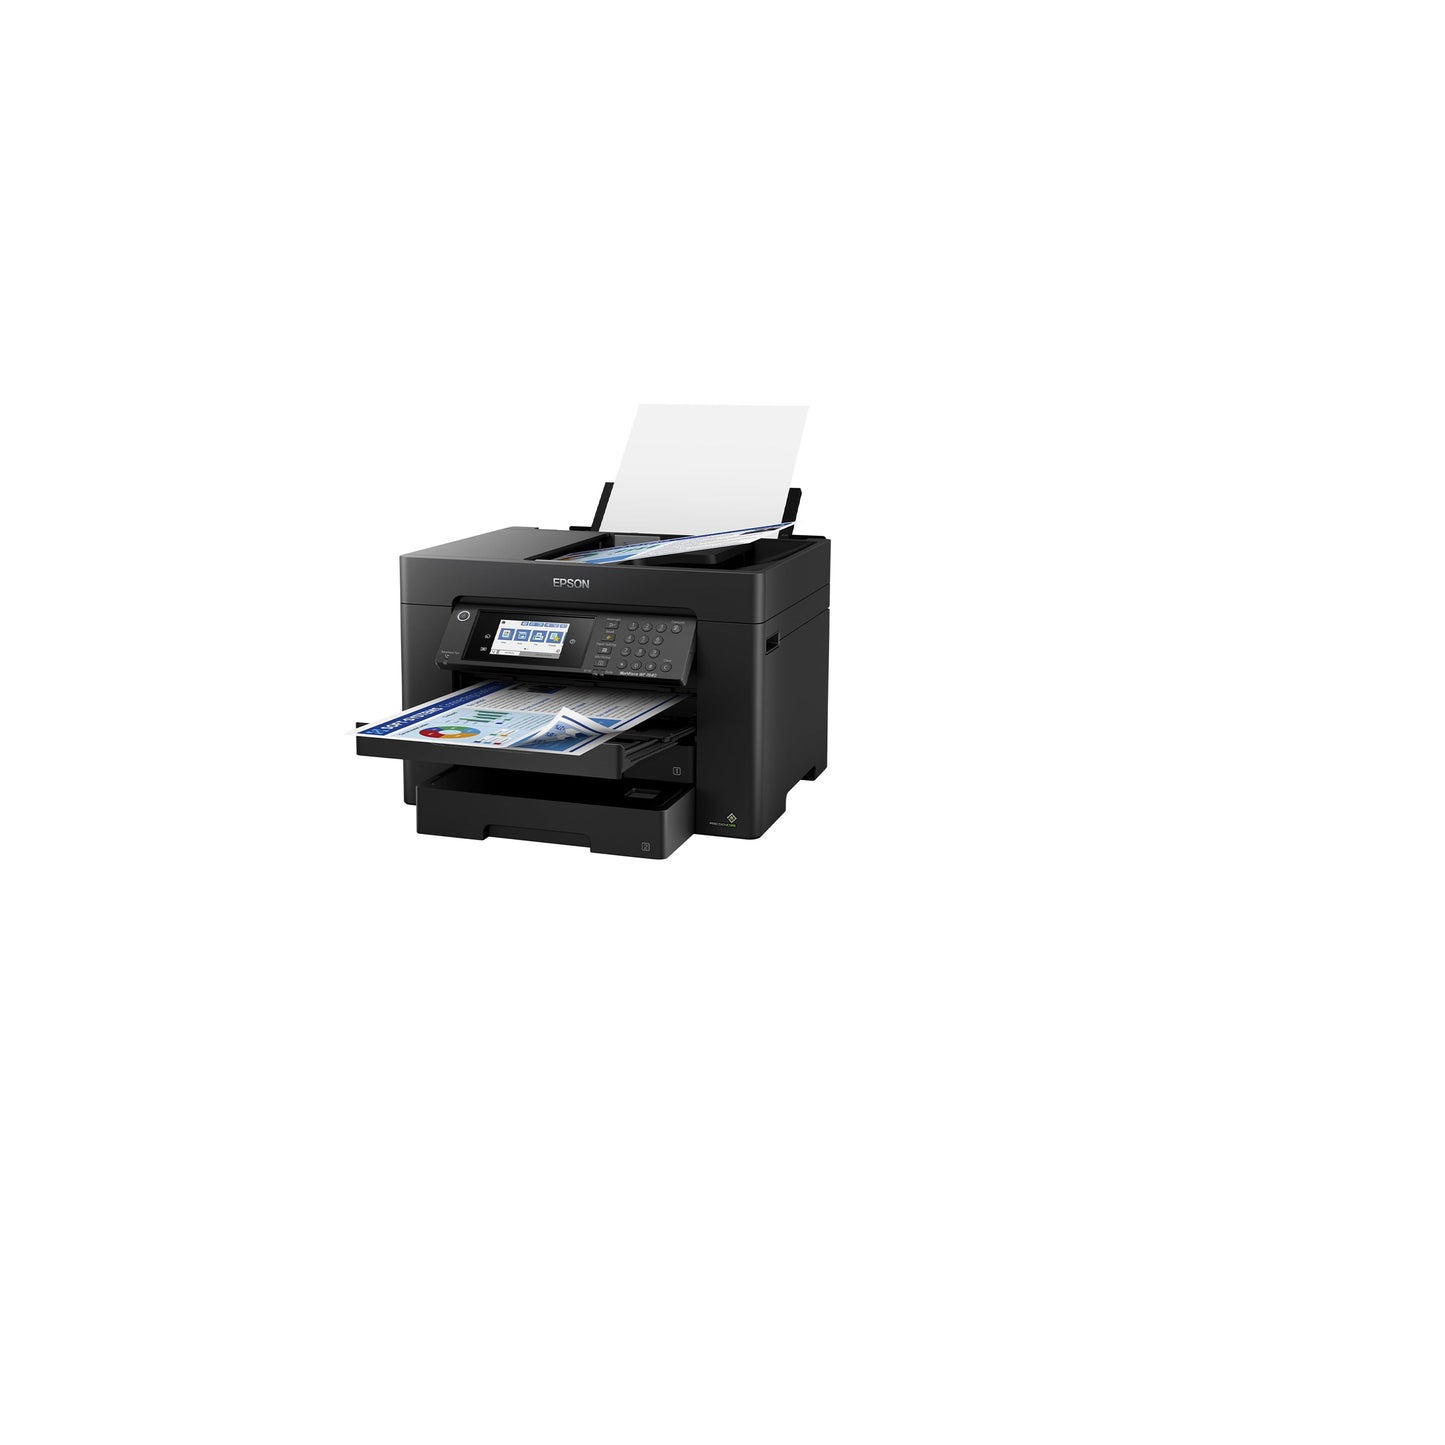 Epson Workforce Pro WF-7840 Wireless All-in-One Wide-Format Printer with Auto 2-Sided Print up to 13" x 19", Copy, Scan and Fax, 50-Page ADF, 500-sheet Paper Capacity, 4.3" Screen,Black